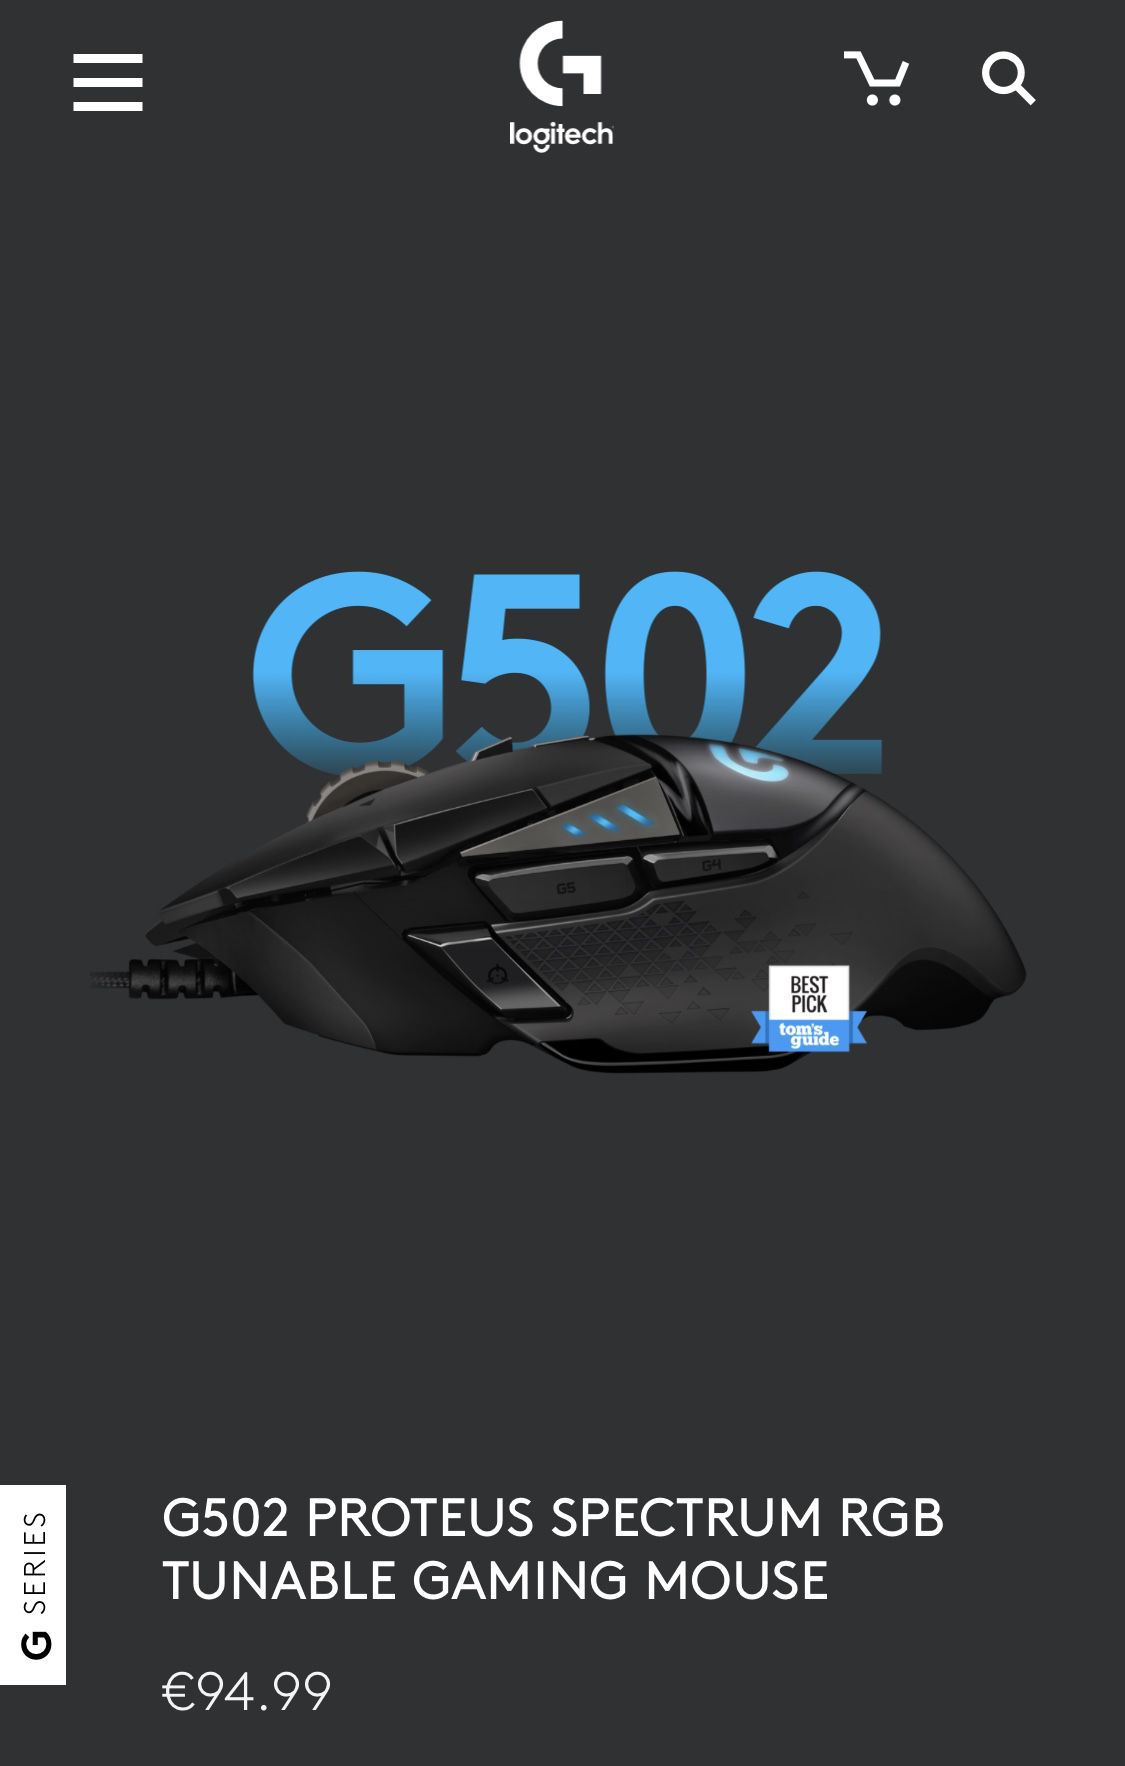 G502 PROTEUS SPECTRUM RGB TUNABLE GAMING MOUSE